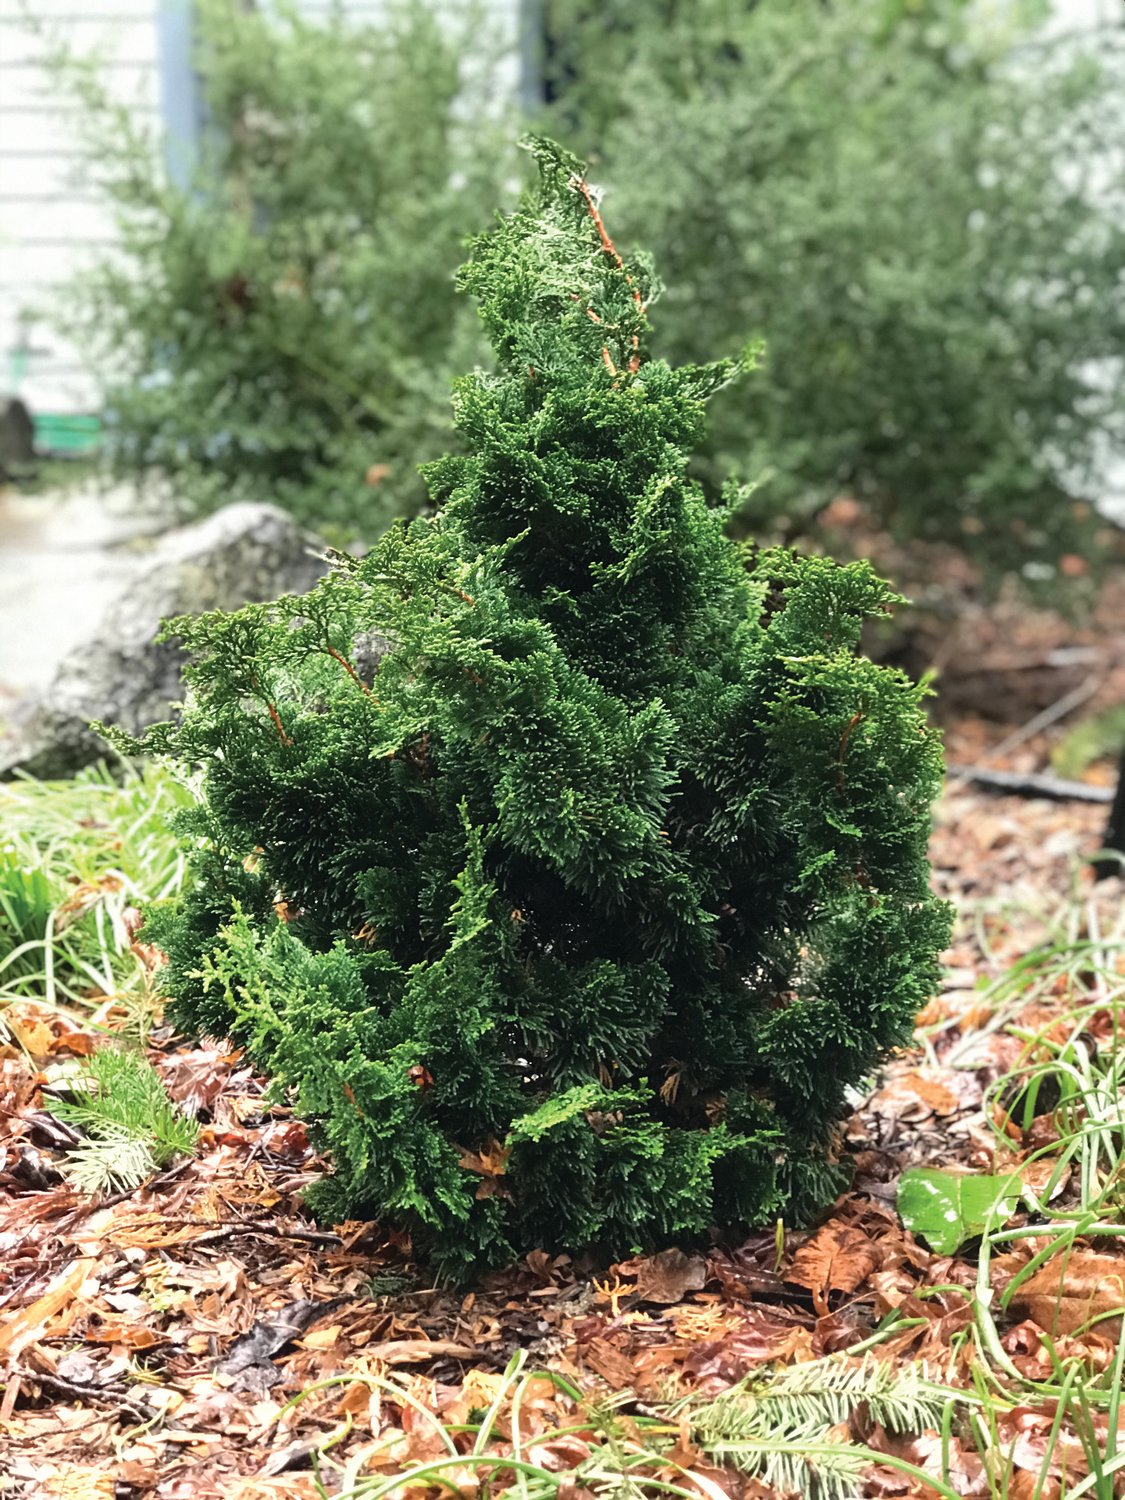 This slow-growing dwarf hinoki cypress will reach a height of about six feet. It requires little maintenance and adds interesting texture to the garden.